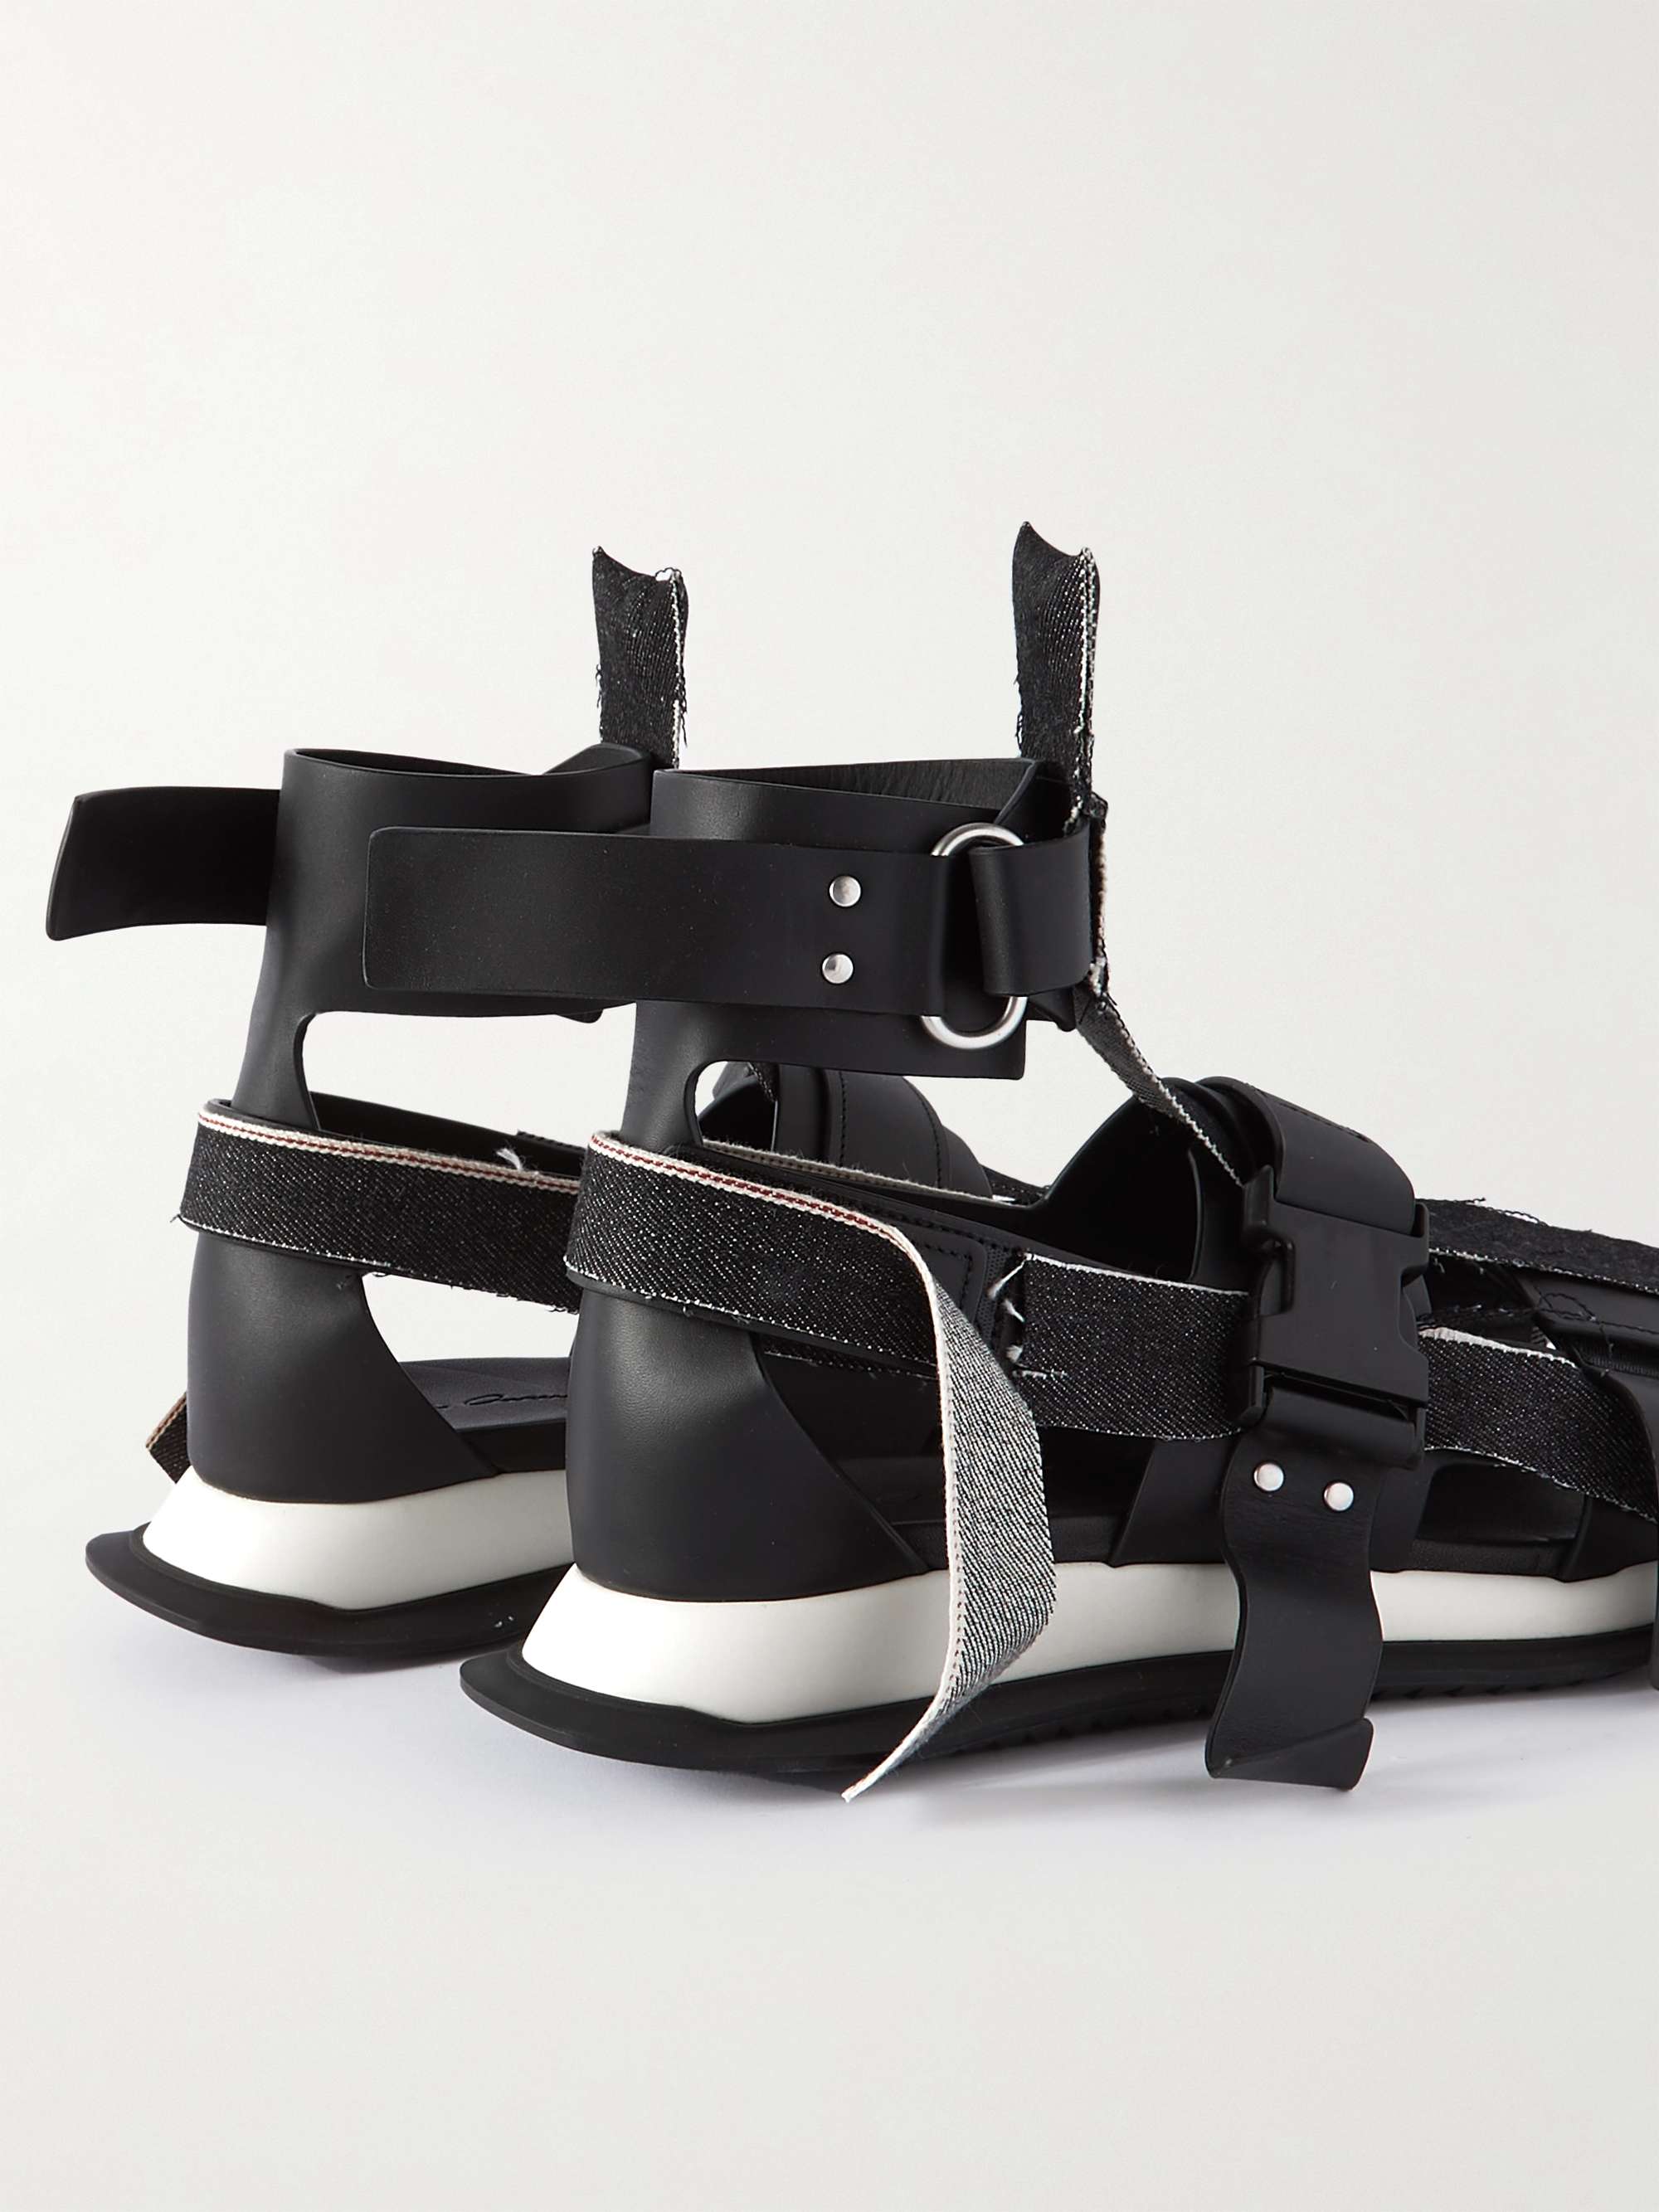 RICK OWENS + Swampgod Upcycled Frayed Denim and Leather Sandals